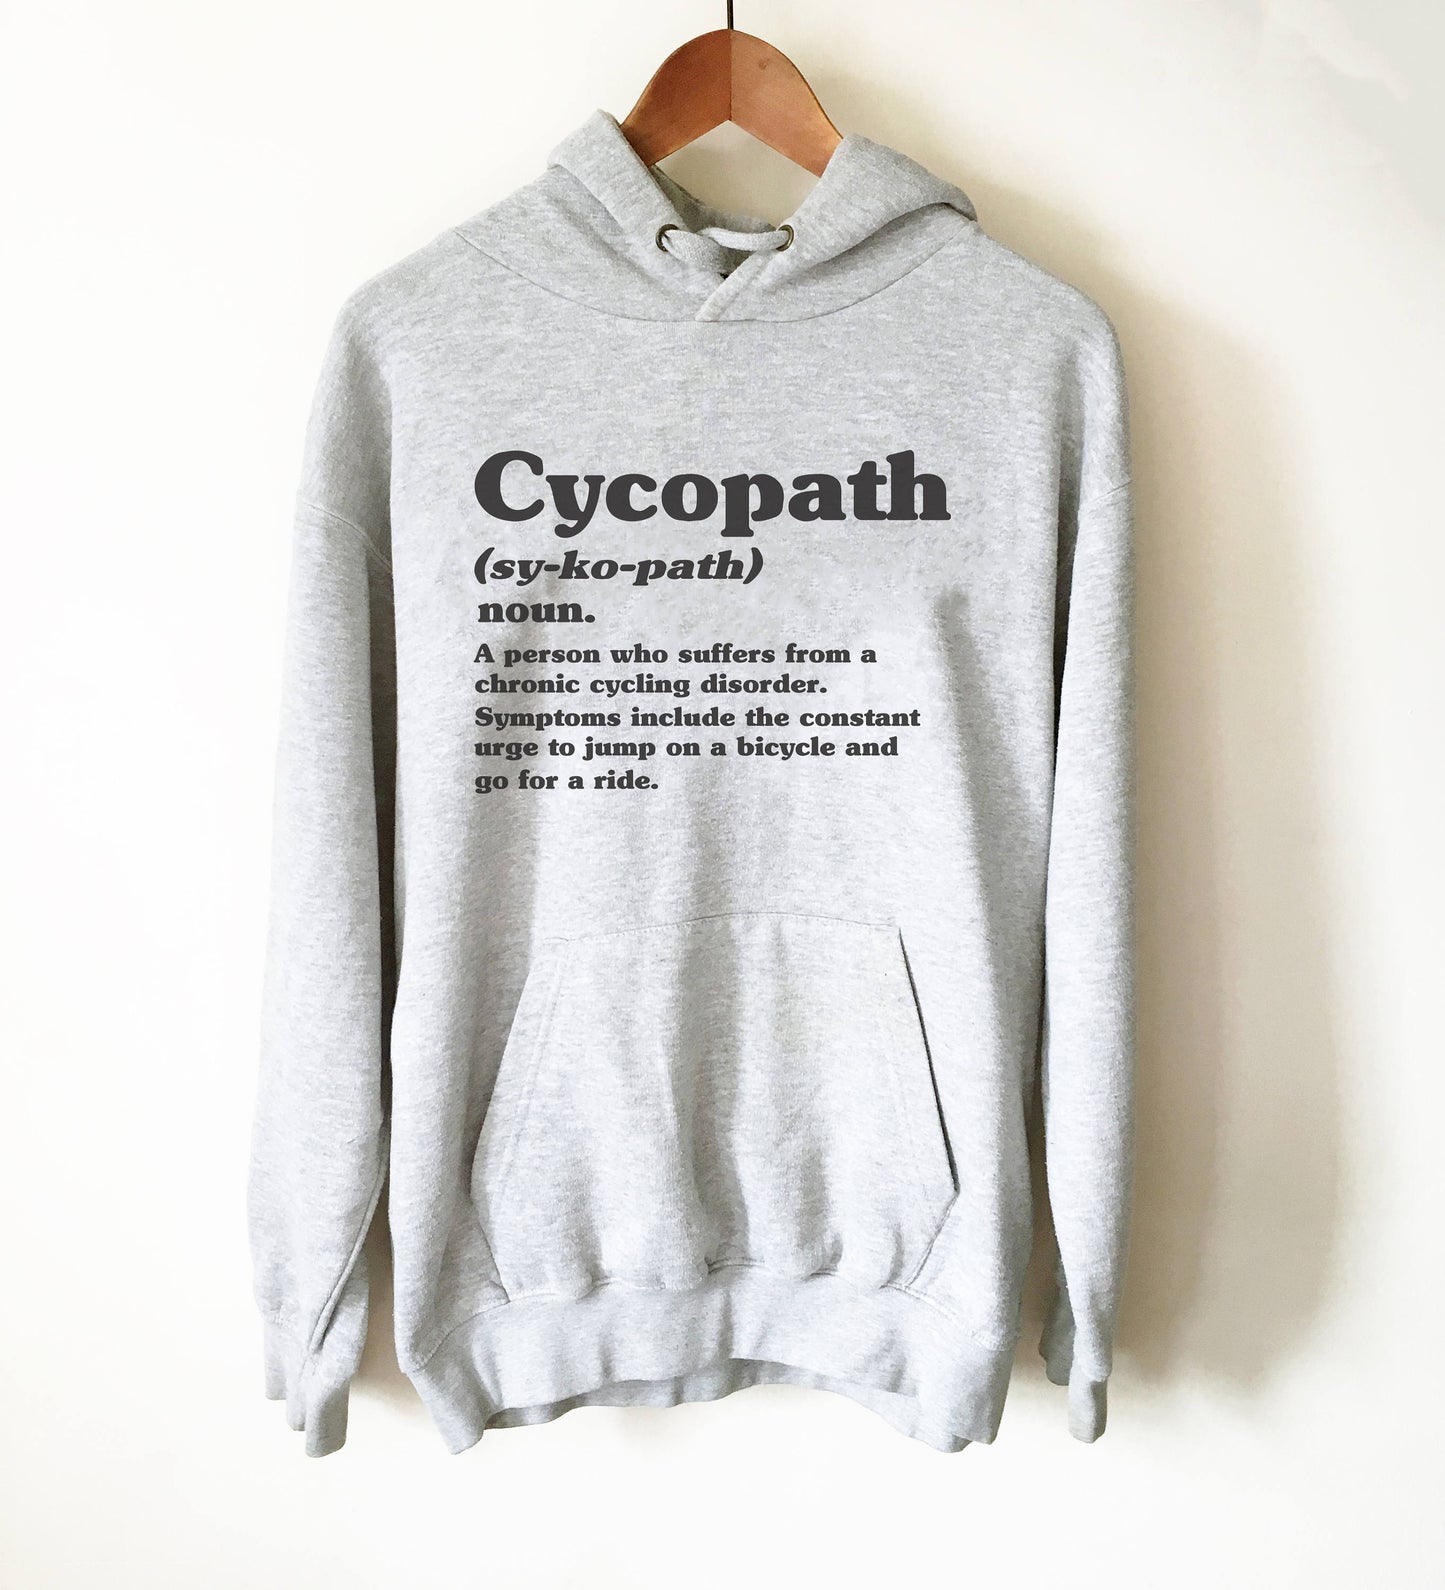 Cycopath Definition Hoodie - Cycling hoodie, Cyclists gift, Bicycle shirt, Mens cyclist gift, Bicycle tshirt women, bicycle lover gift